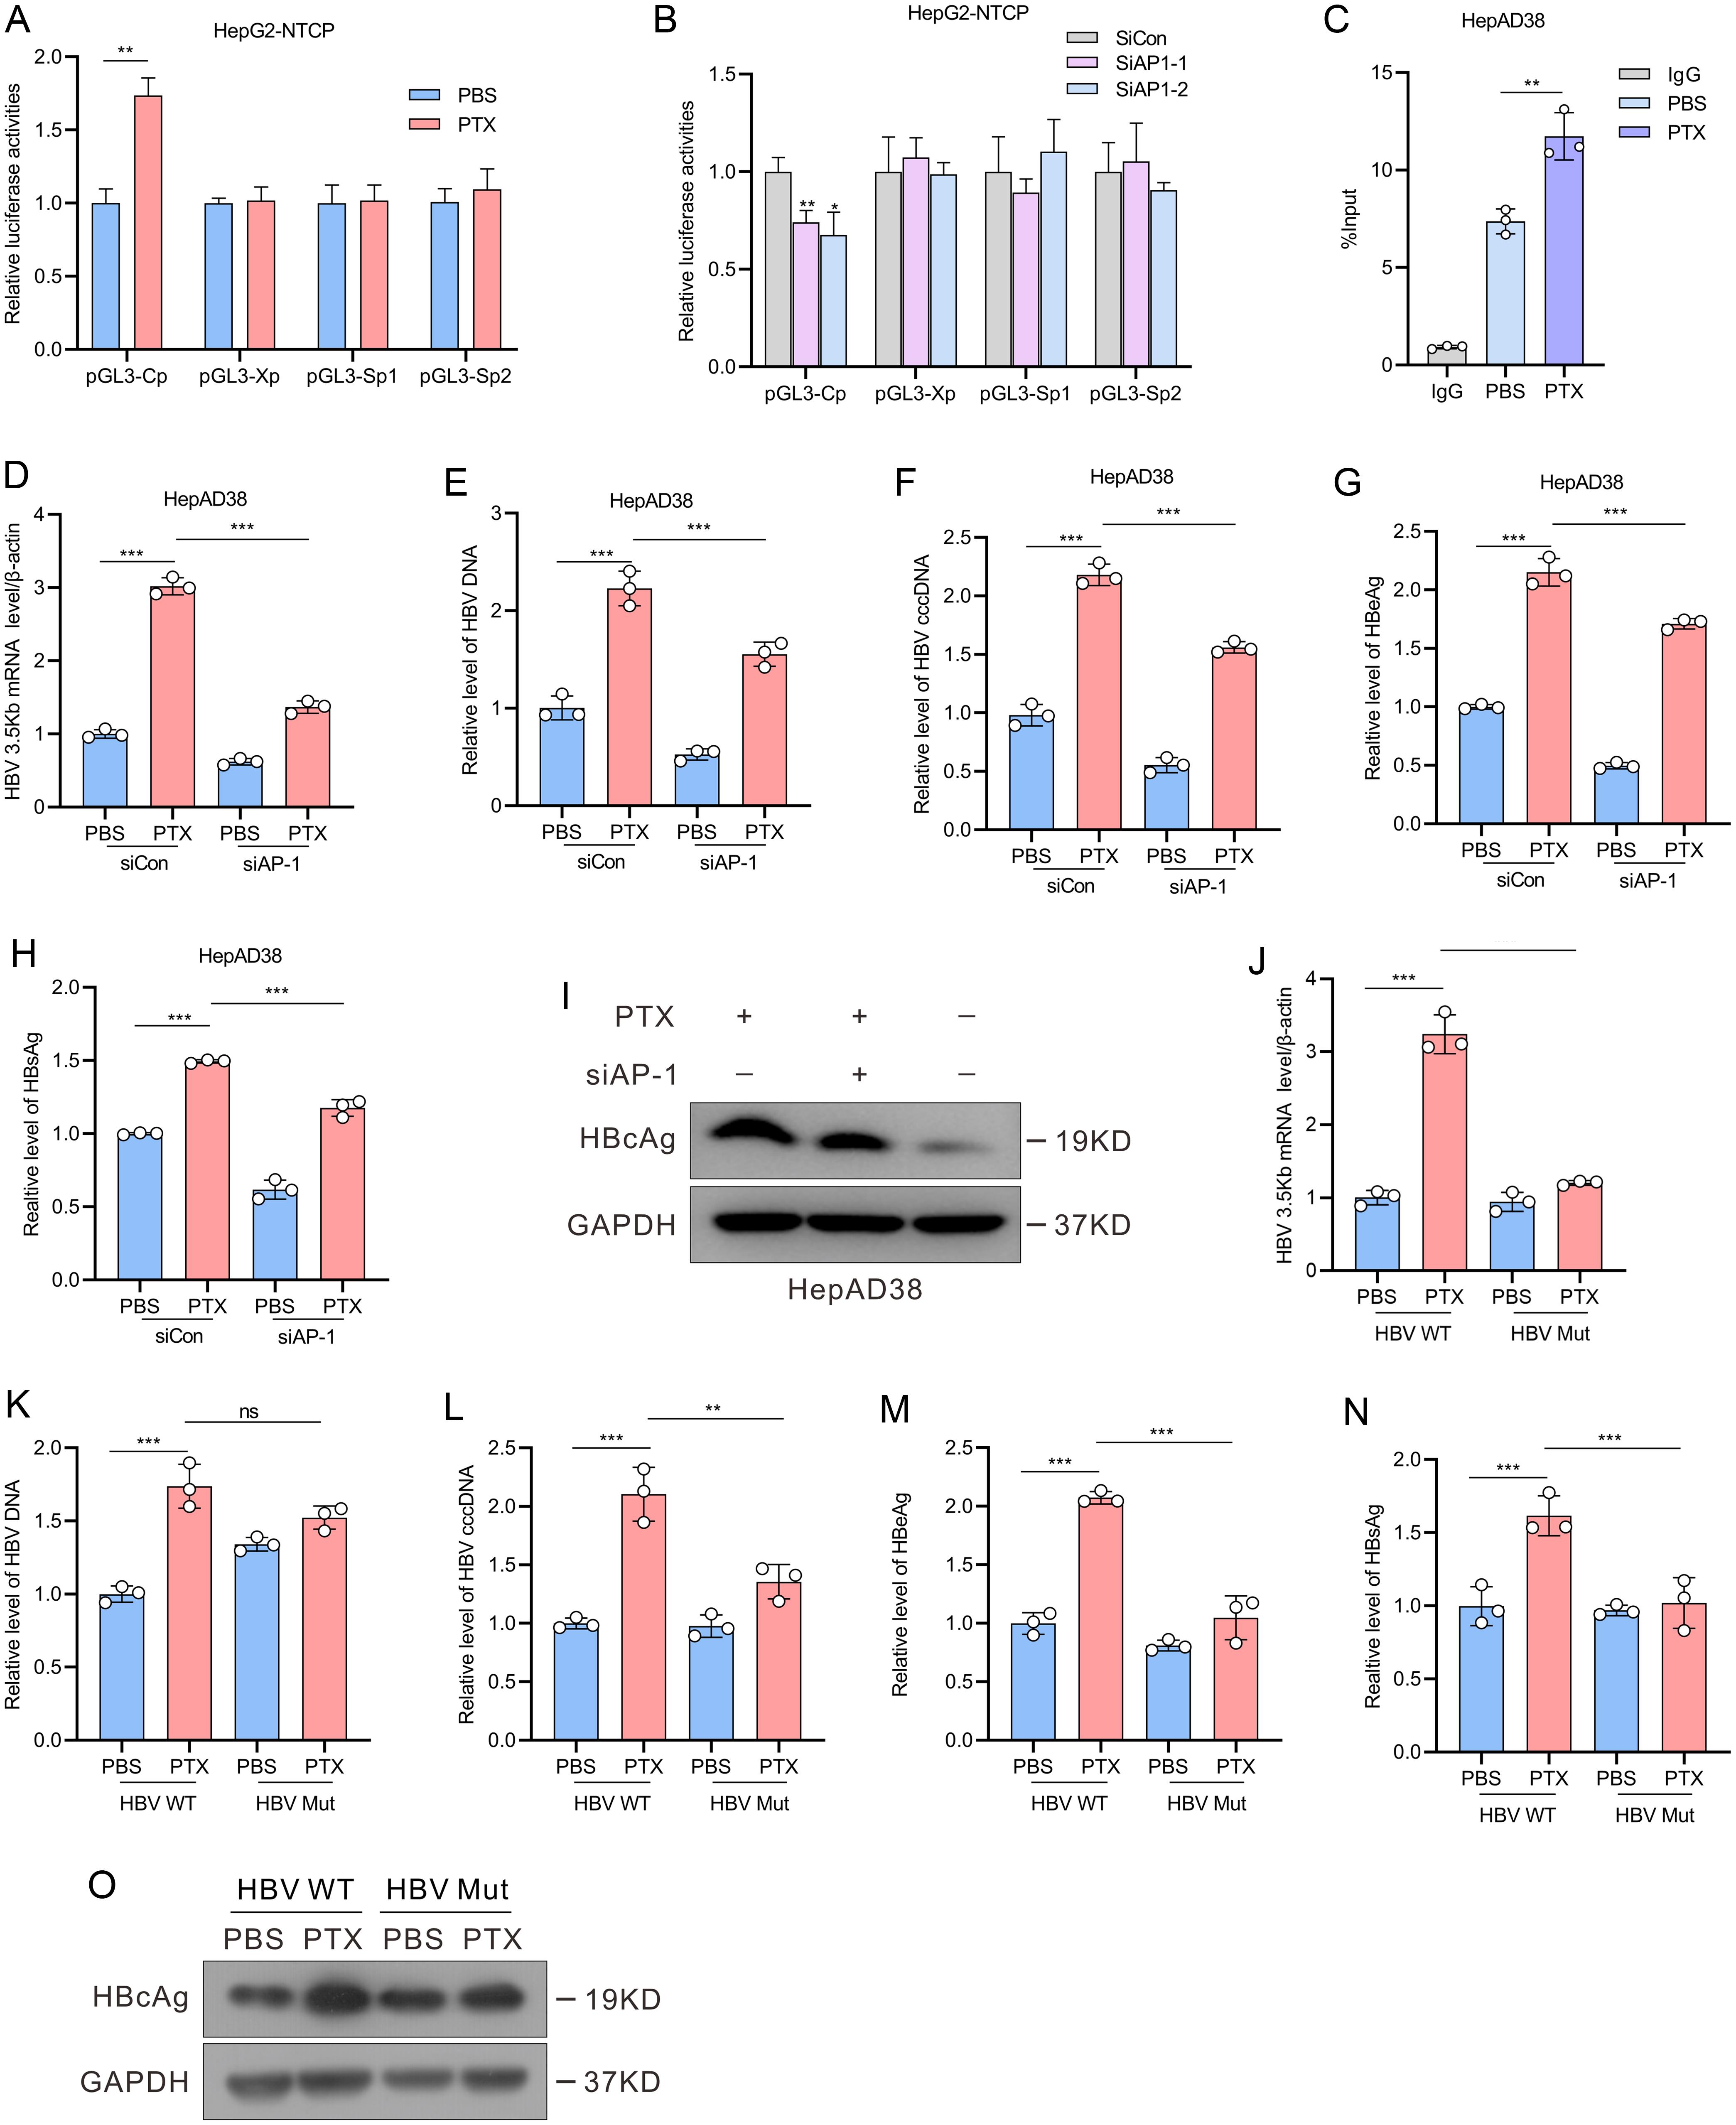 PTX enhances viral HBV replication by activating the binding of AP-1 to HBV core promoter.